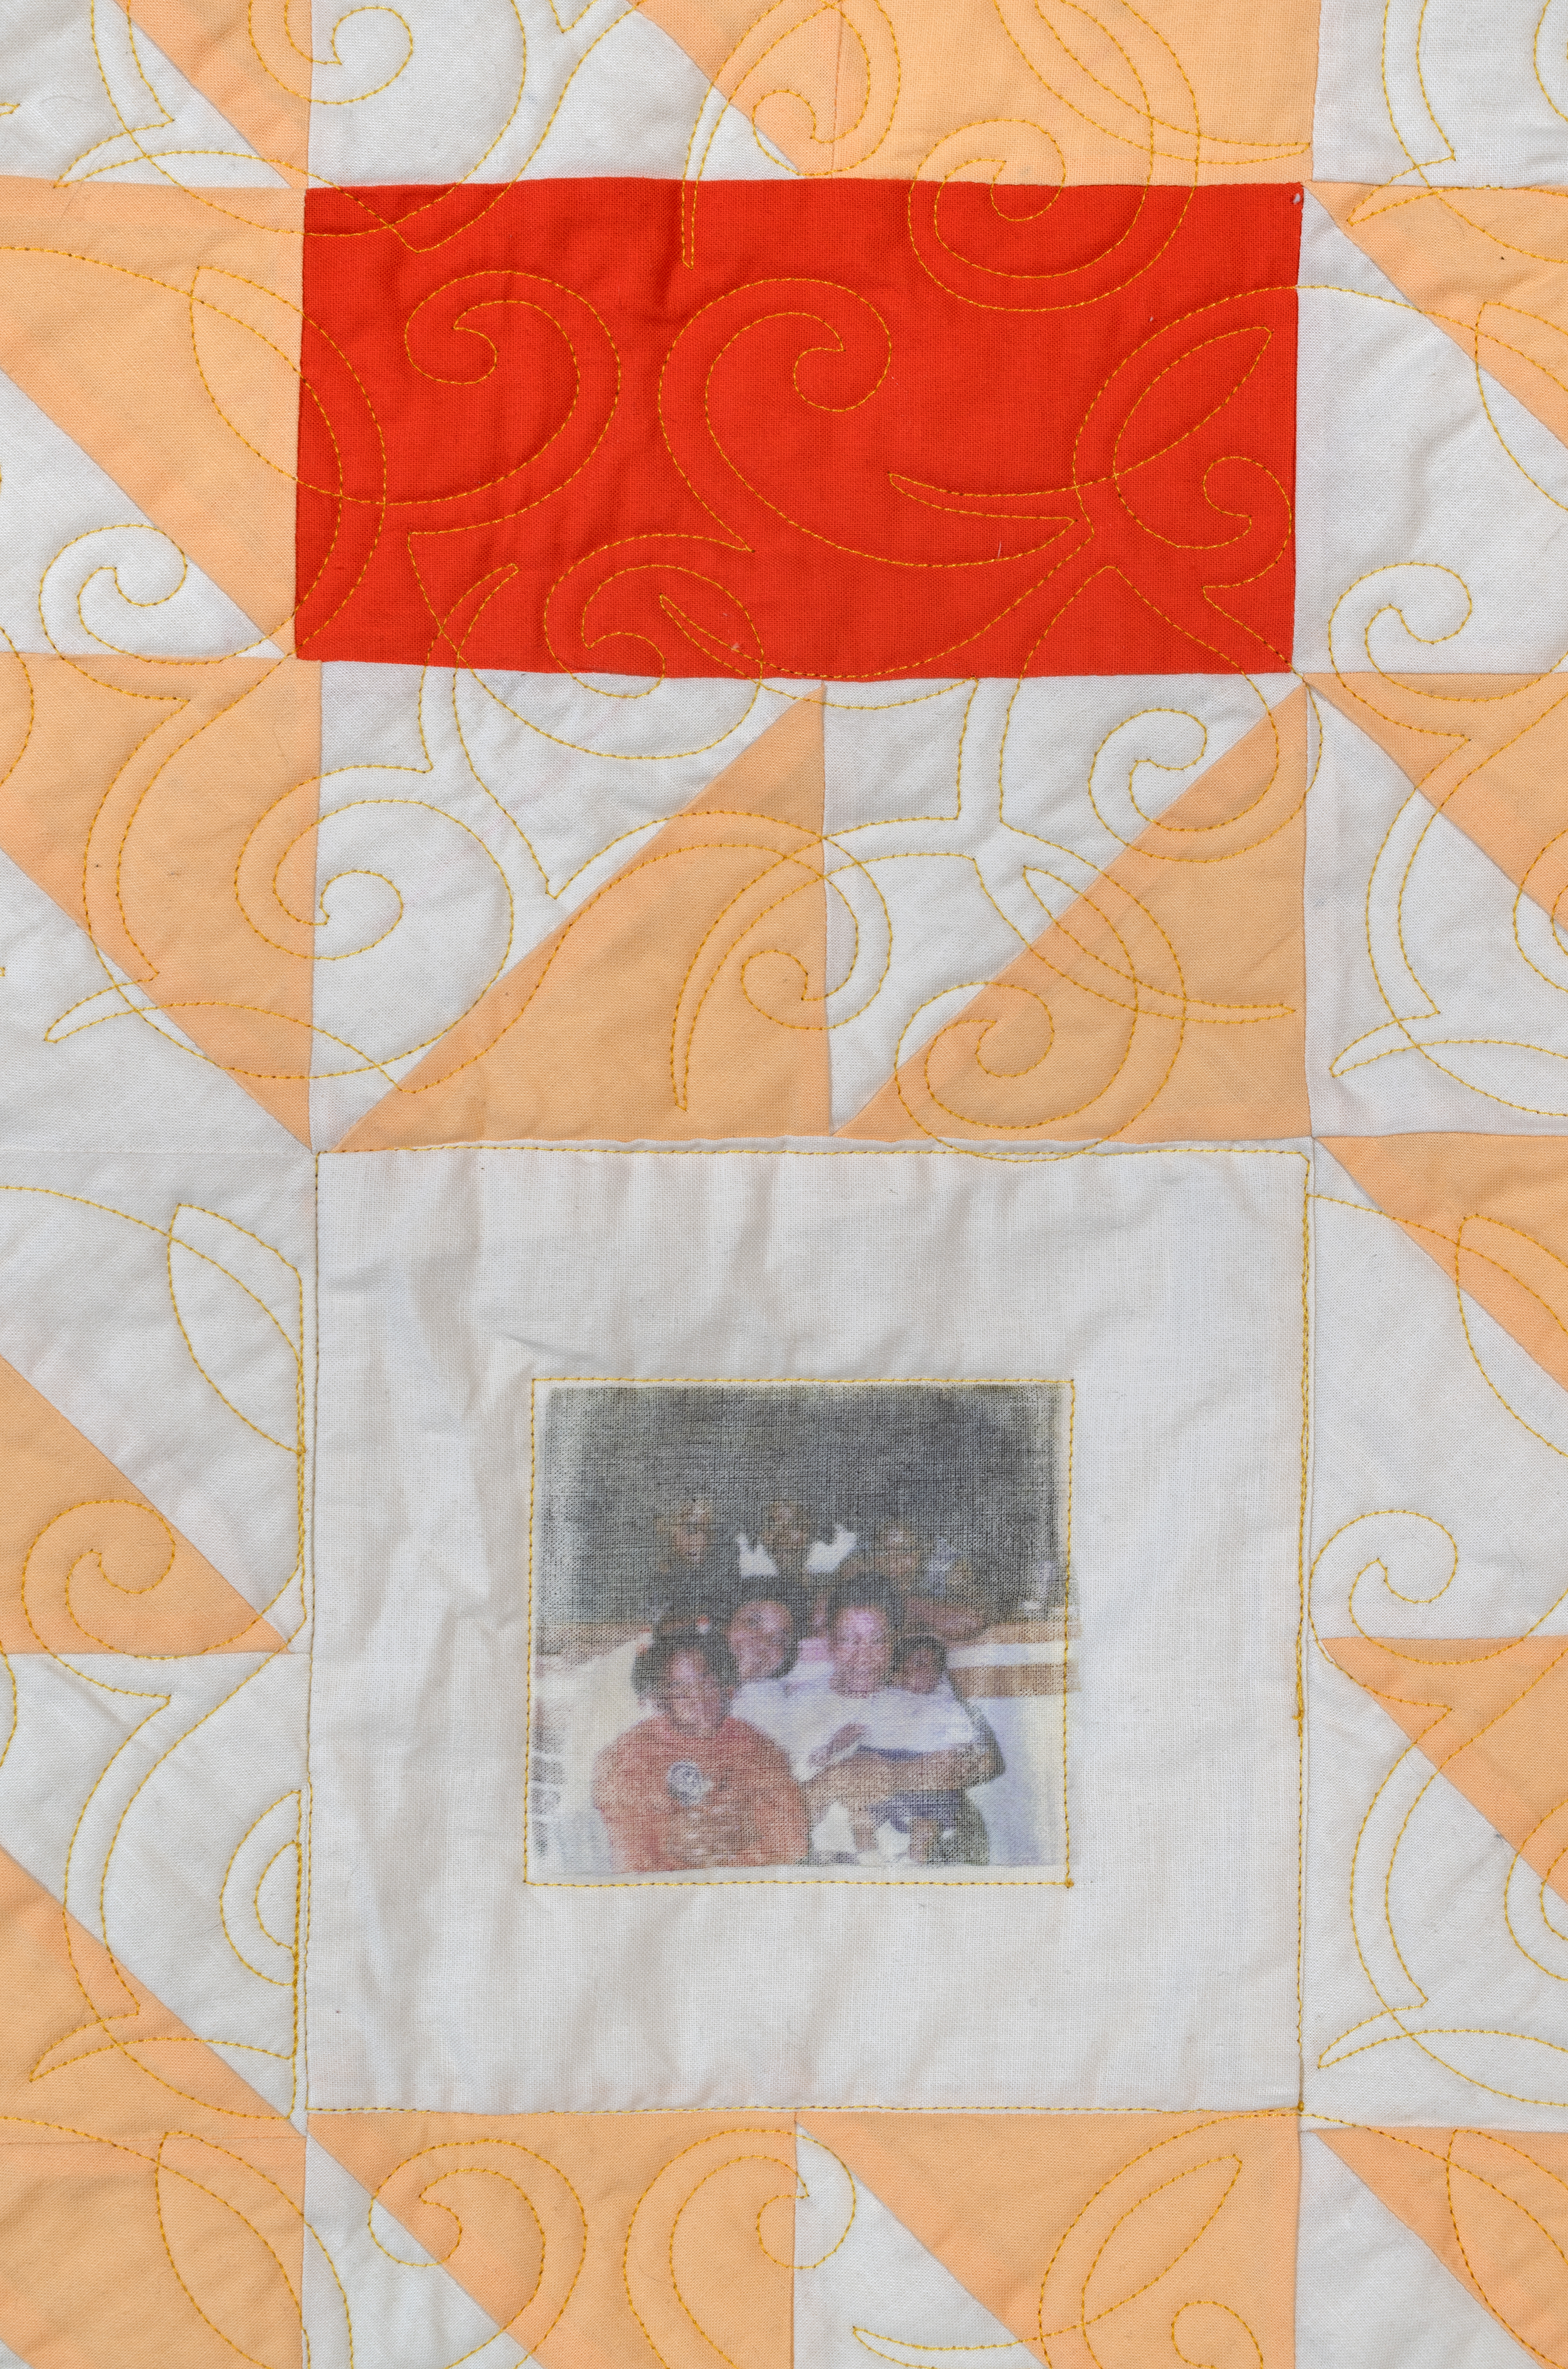 White, peach, and red quilt with family photograph in center.